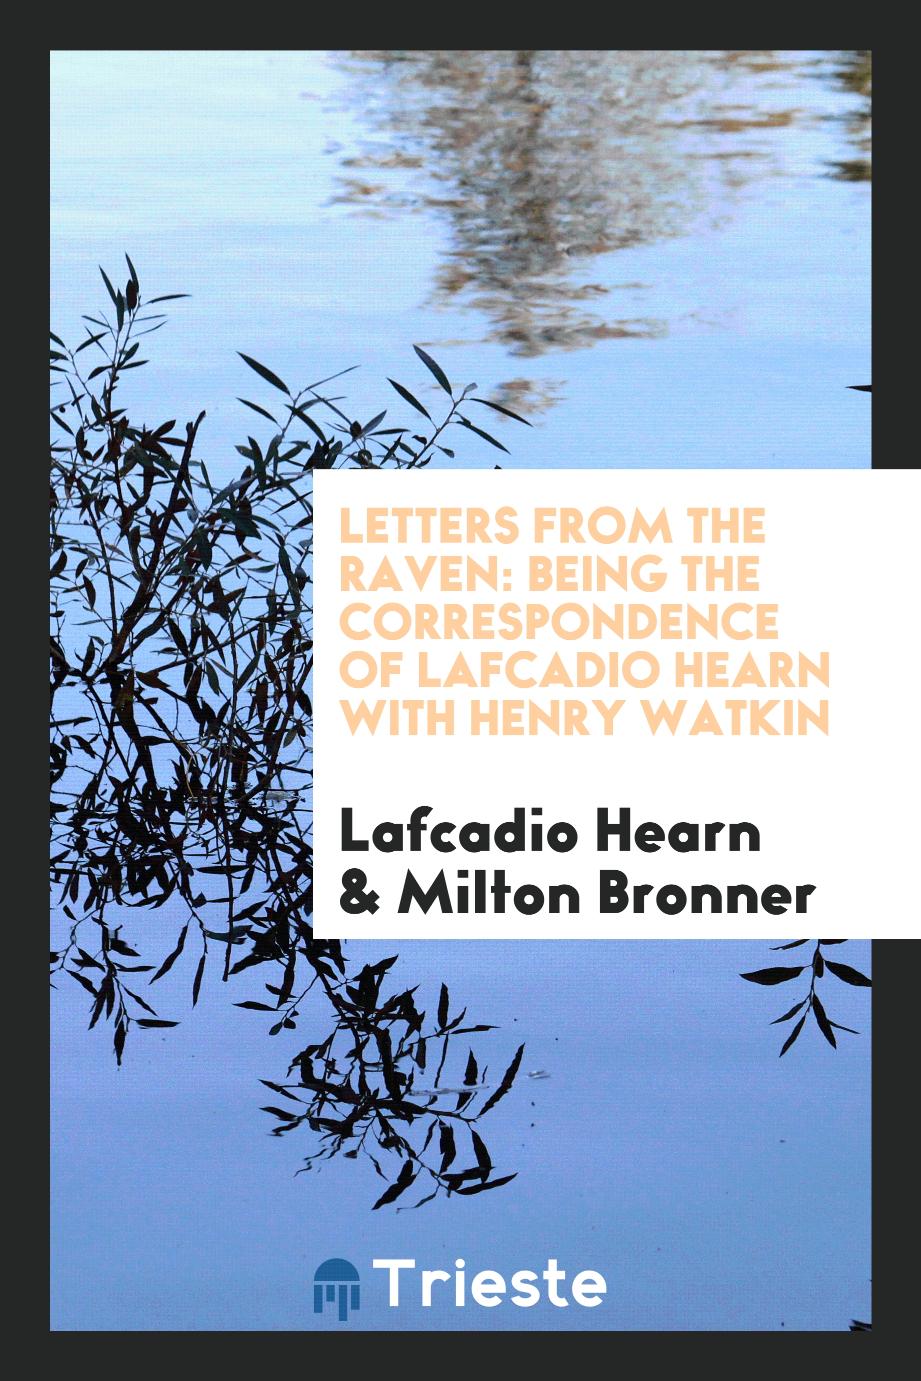 Letters from the Raven: Being the Correspondence of Lafcadio Hearn with Henry Watkin